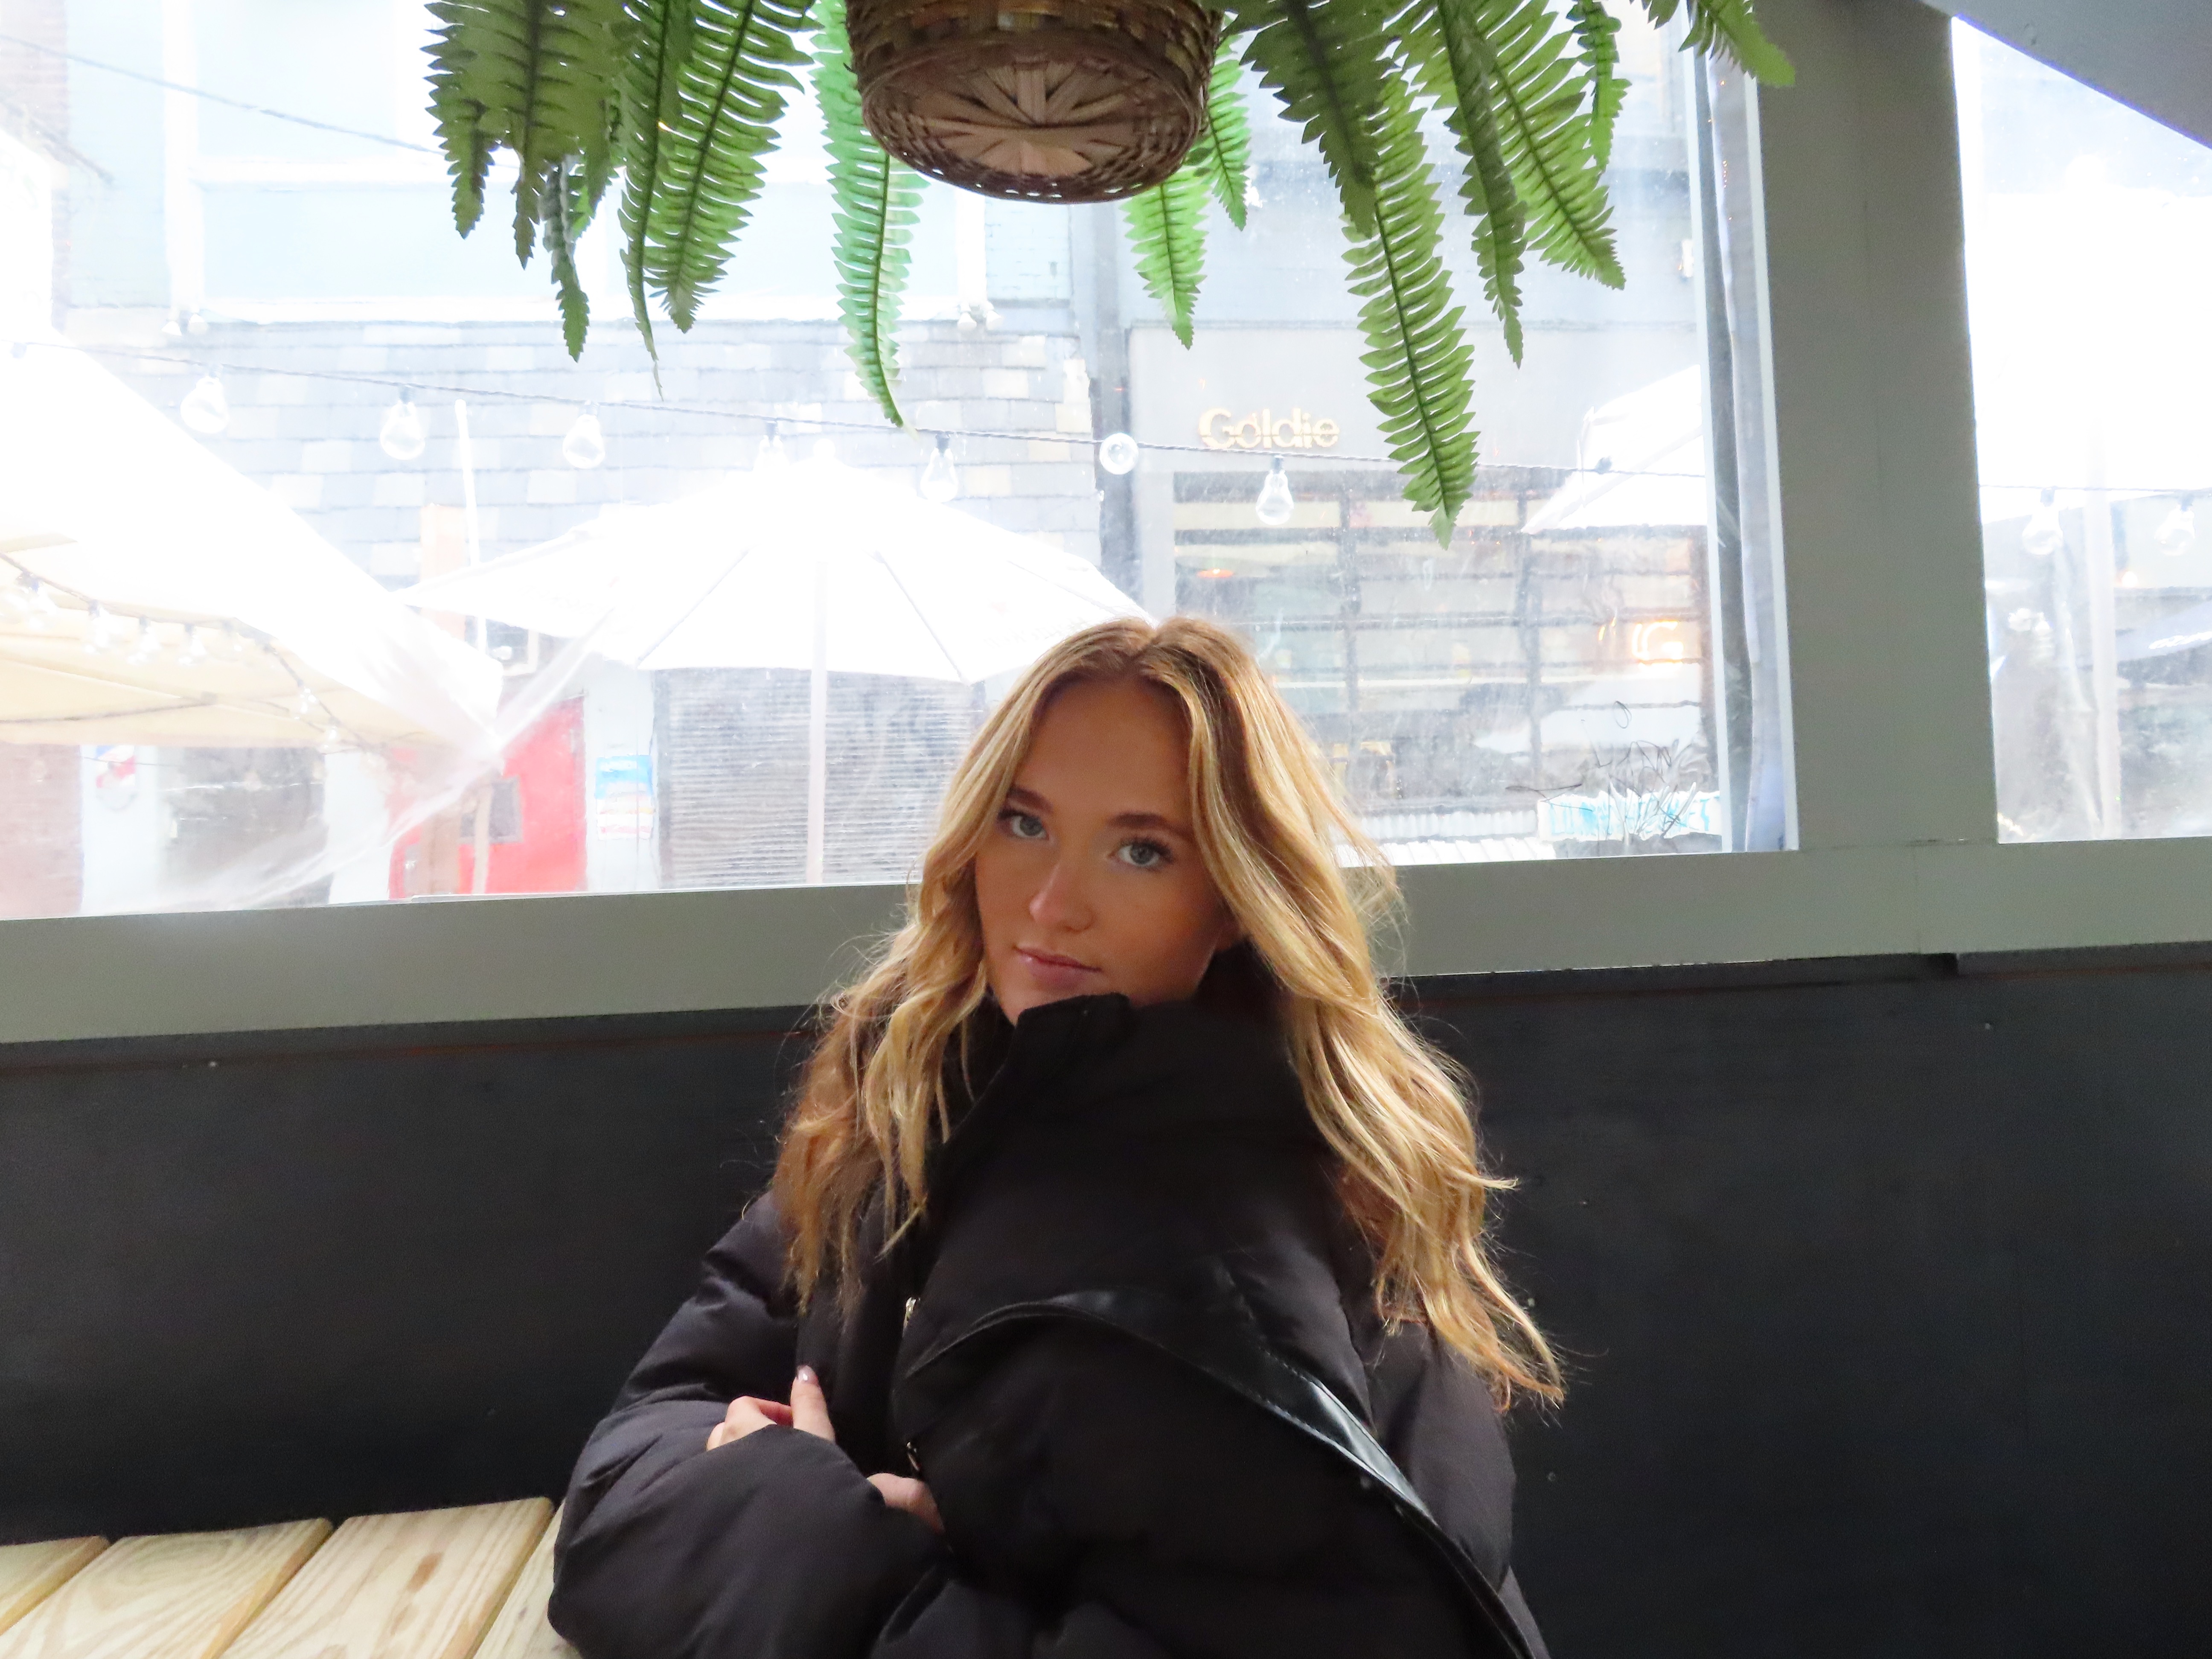 This is a rectangle image of Grace sitting at a wooden table in the city. She is wearing a black puffer jacket with a black leather purse around her shoulder. Her hair is red with blonde highlights, and it is down and slightly curled. She has mascara and light face makeup on. There is a green hanging plant above her in a brown basket, and the back ground is washed out. The back ground has a white umbrella and a couple shops that are visible.